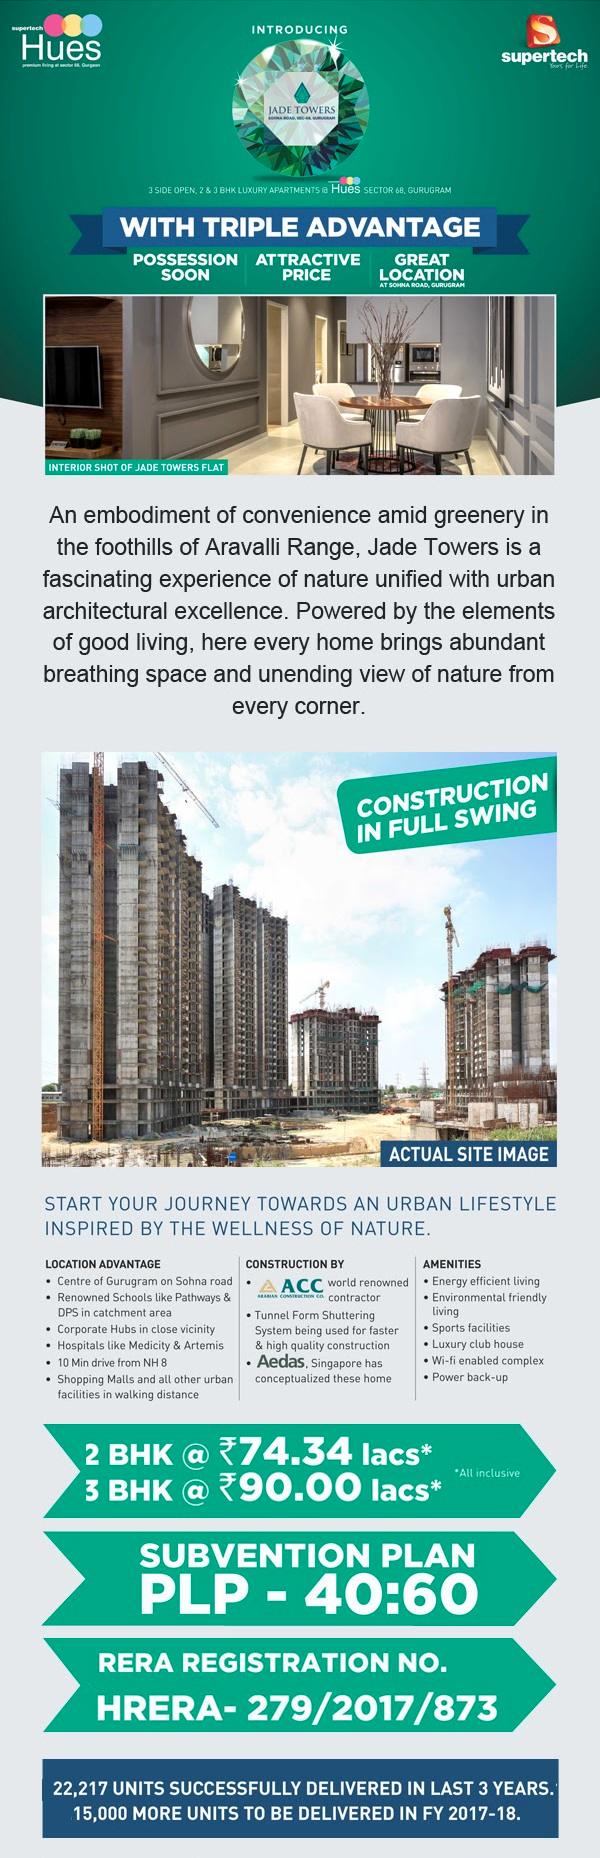 Supertech Jade Towers offers 2 BHK @ 74.34 lacs & 3 BHK @ 90 lacs with subvention plan of 40:60 Update